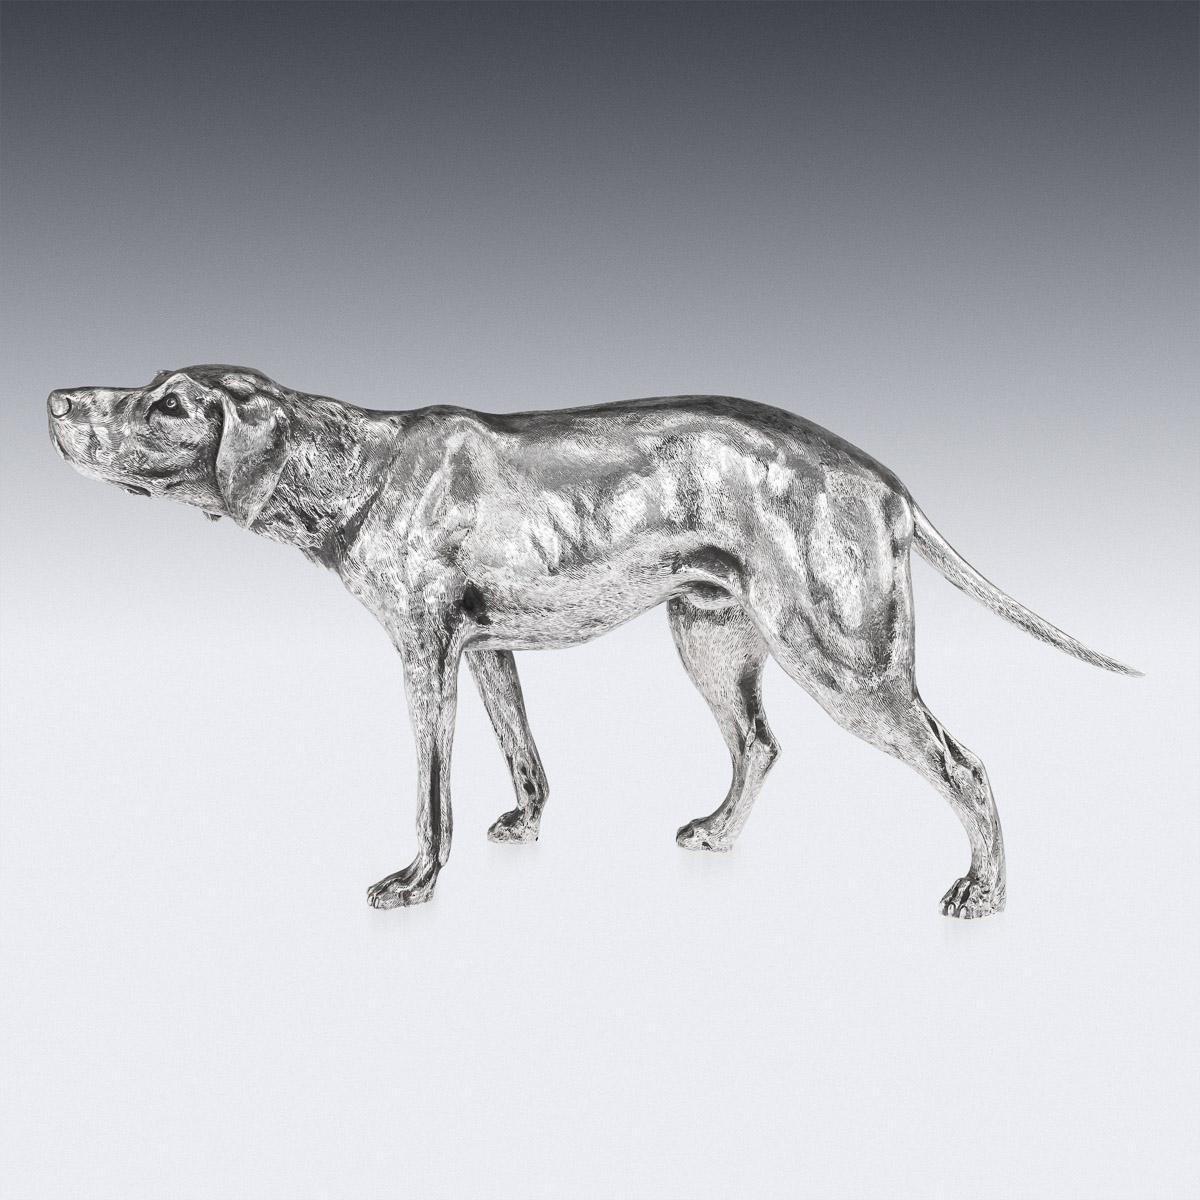 Antique 20th Century German large solid silver statue, beautifully and realistically modelled as a hunting dog, a German shorthaired pointer. Hallmarked with a German silver marks (925 standard).

Height: 22cm
Width: 47 x 8cm
Weight: 1340g